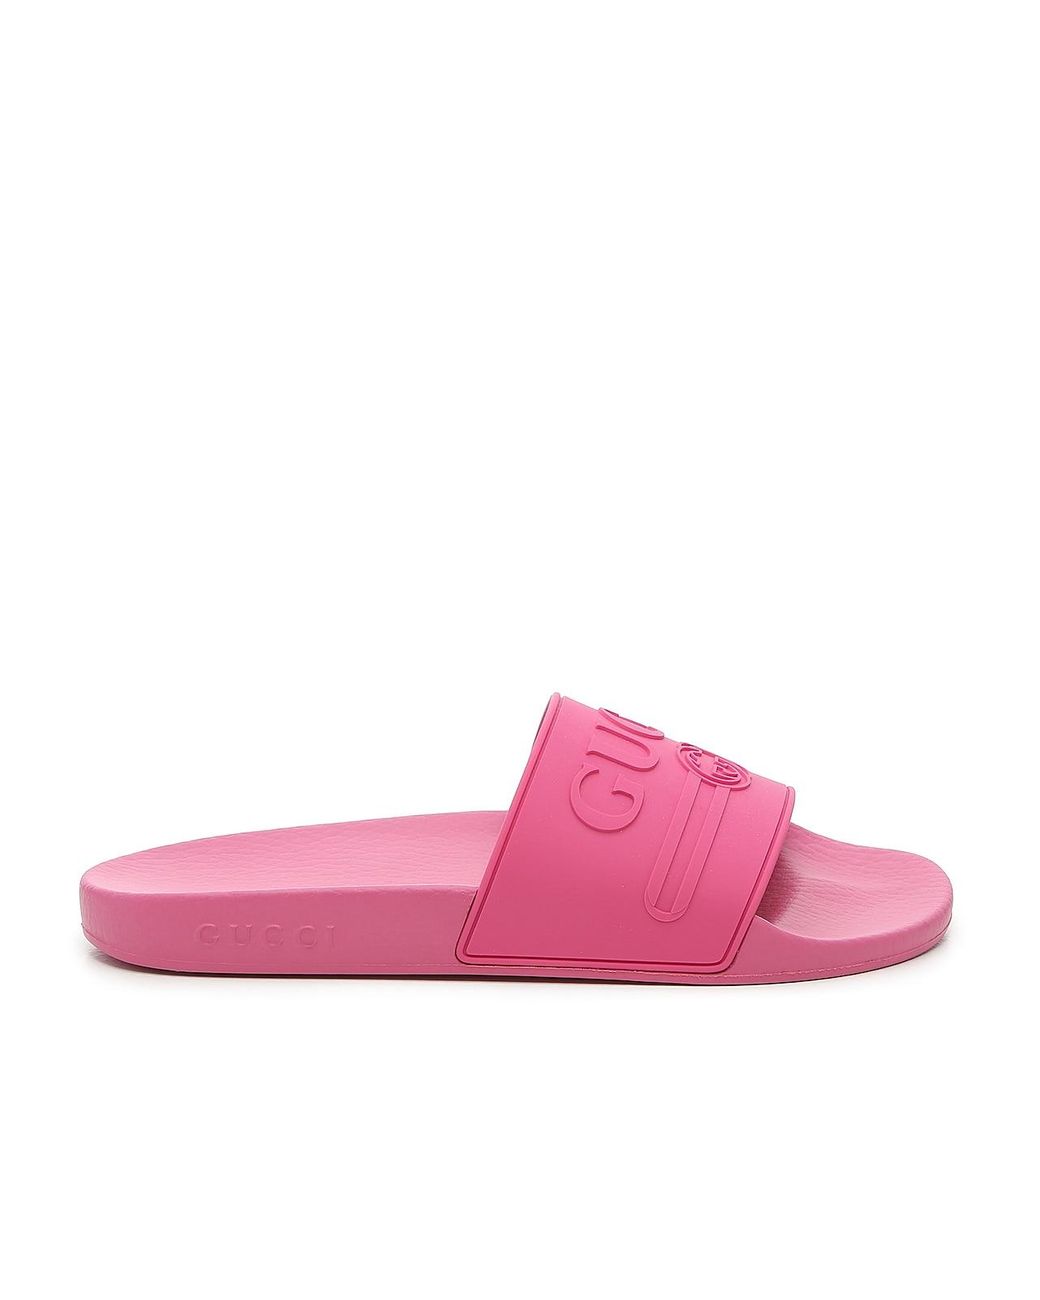 Gucci Flannel Pursuit Slide Sandal in Fuchsia (Pink) | Lyst